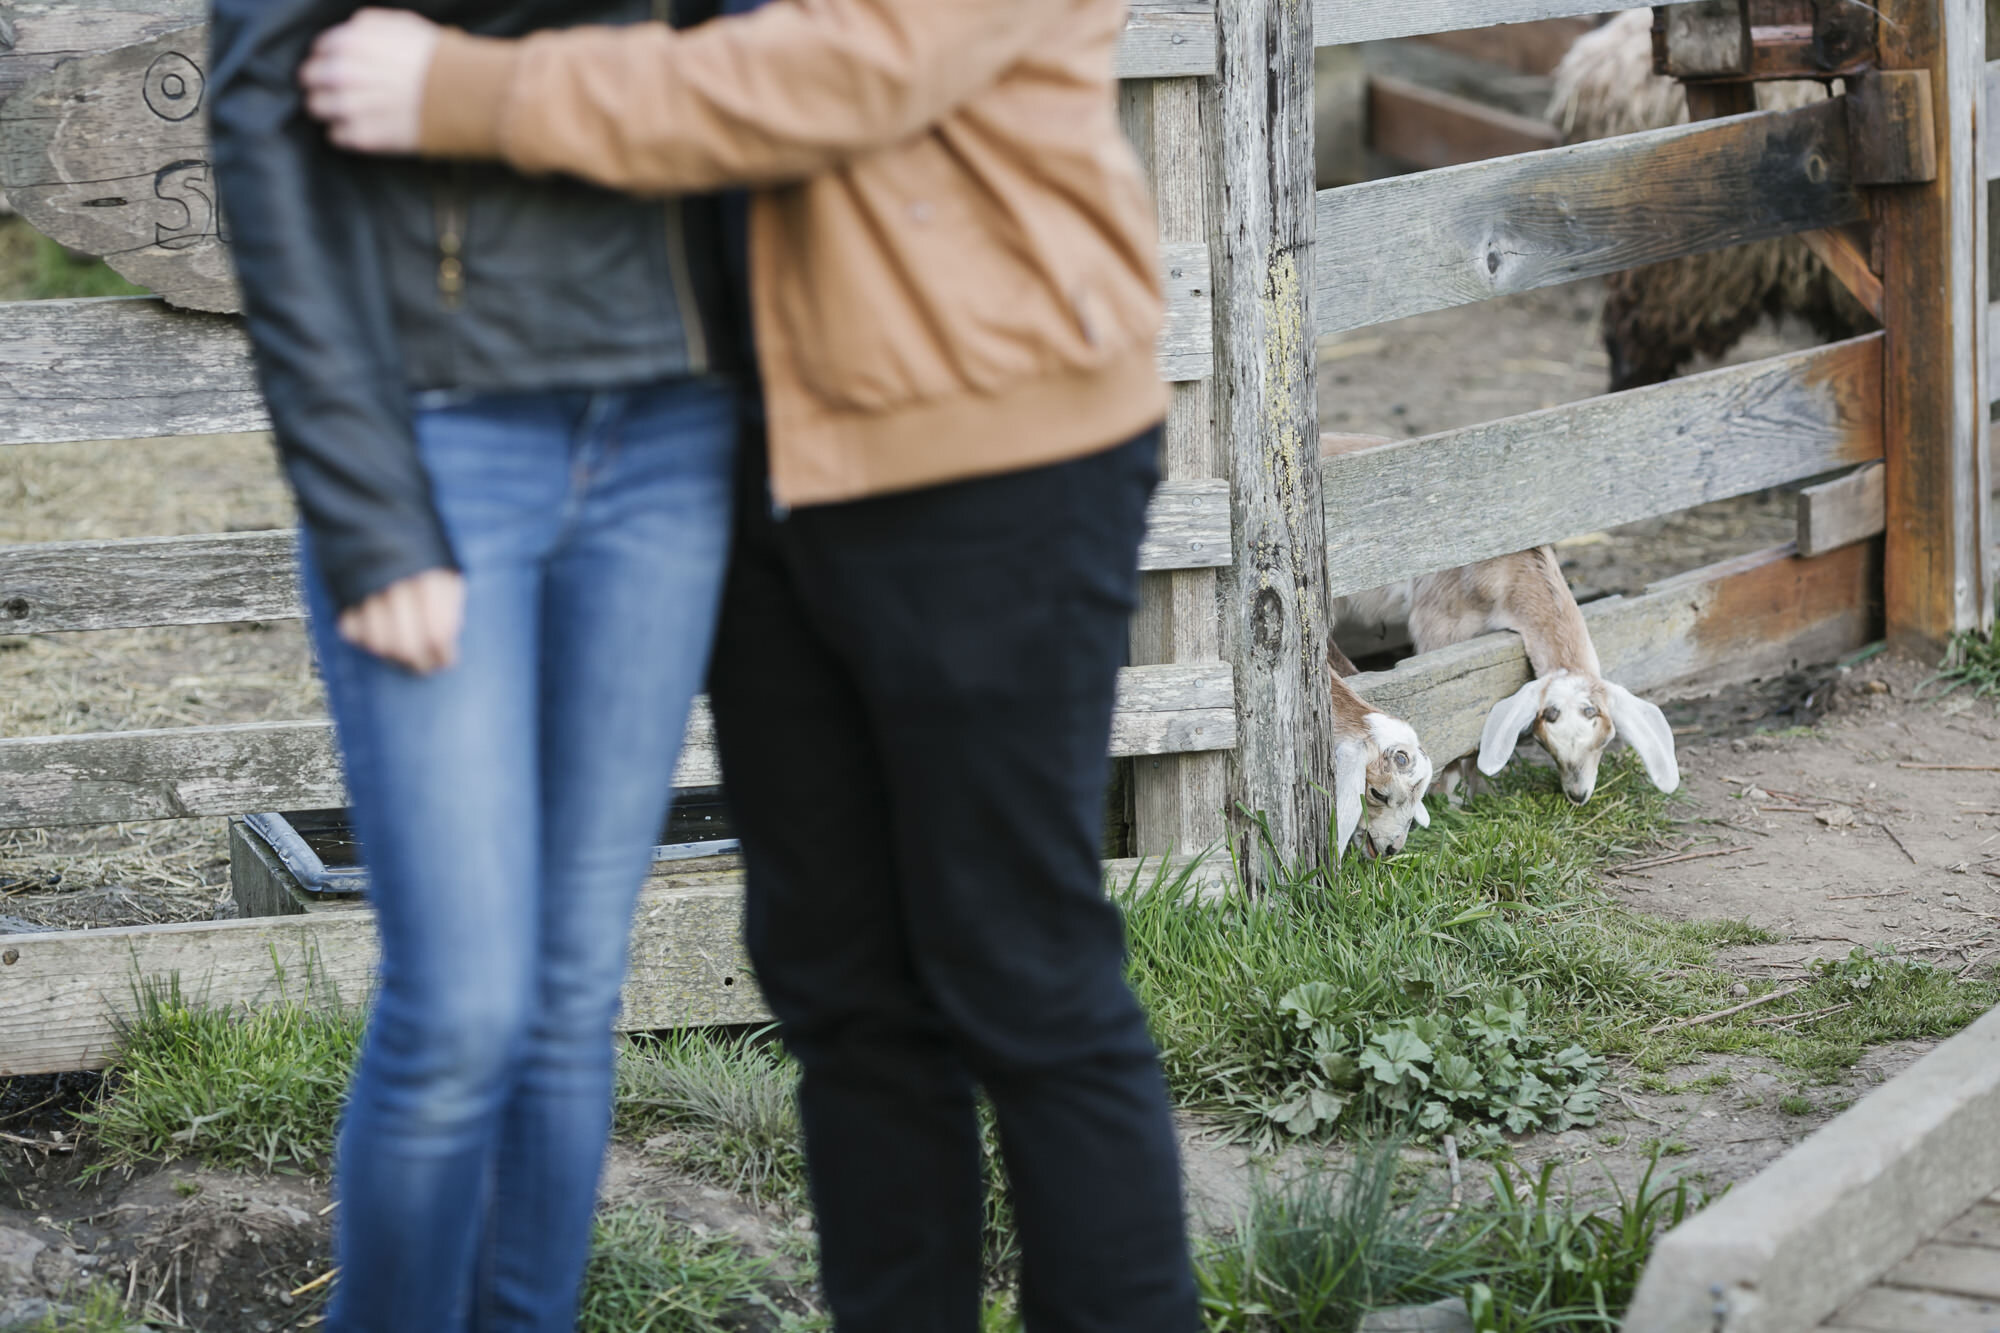 Engagement session with baby goats at Slide Ranch coastal farm in California